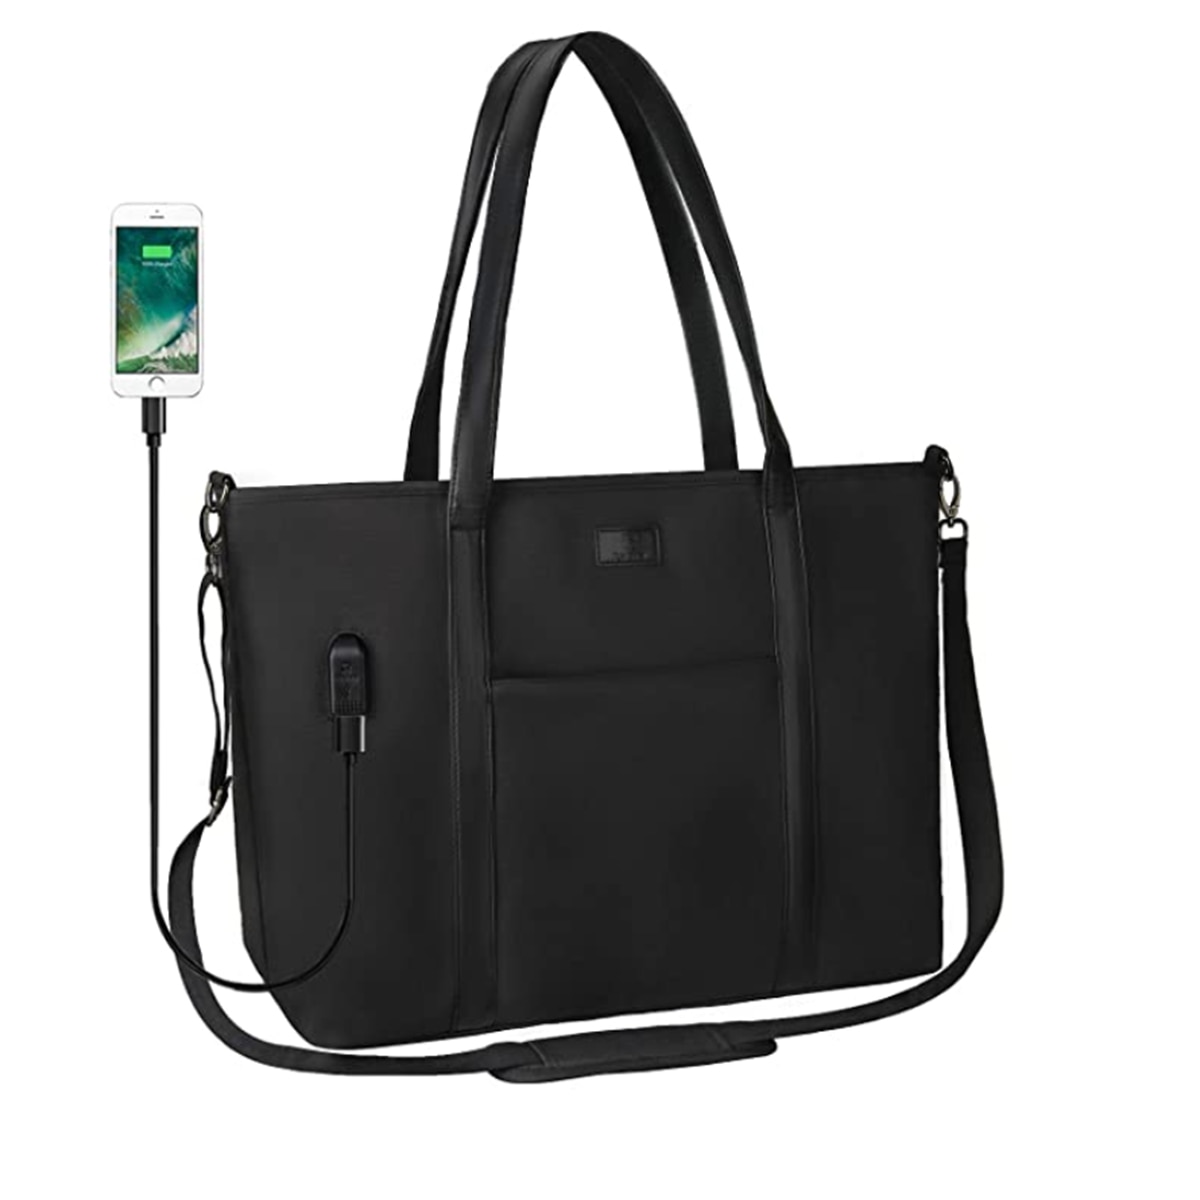 Stylish And Functional Fall Handbags for Returning Back To Office